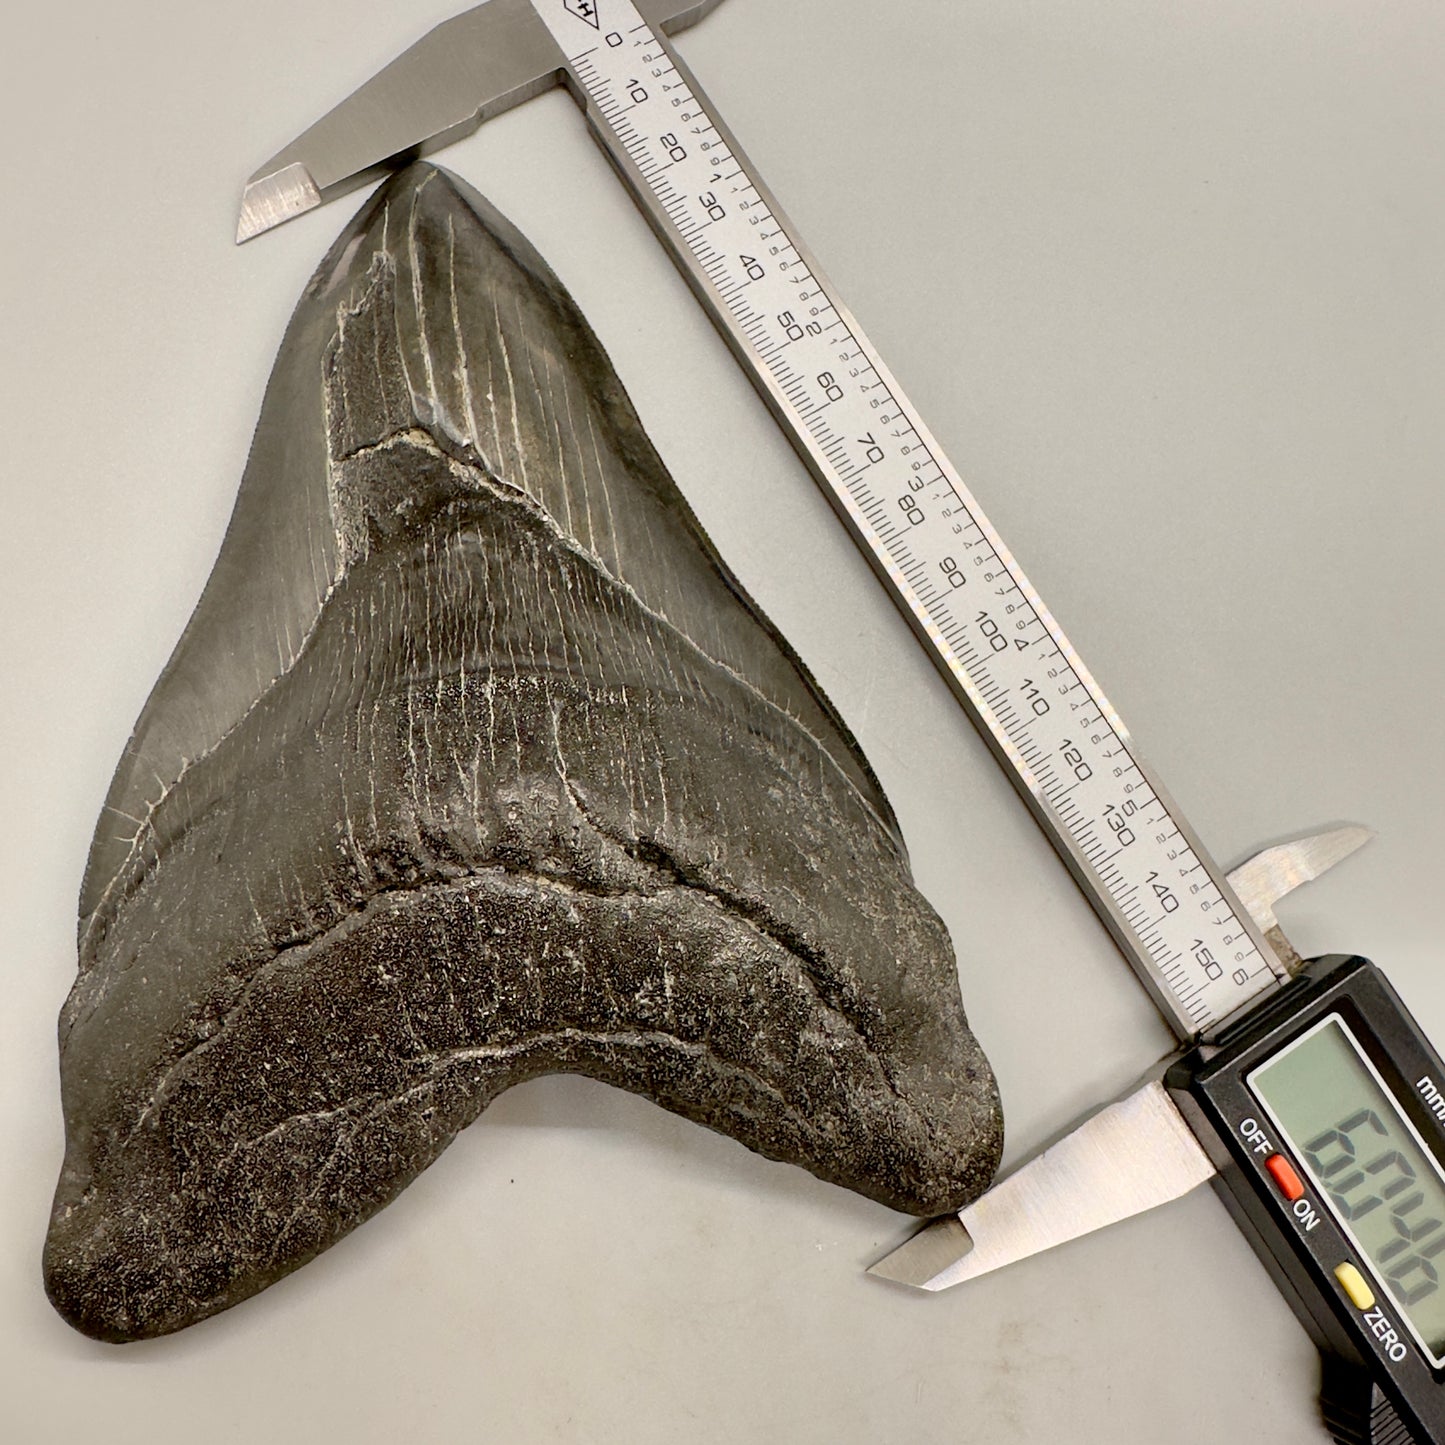 EXTRA LARGE 6.04" Fossil Megalodon Tooth: Scuba Diving, USA CM4633 - Front with caliper